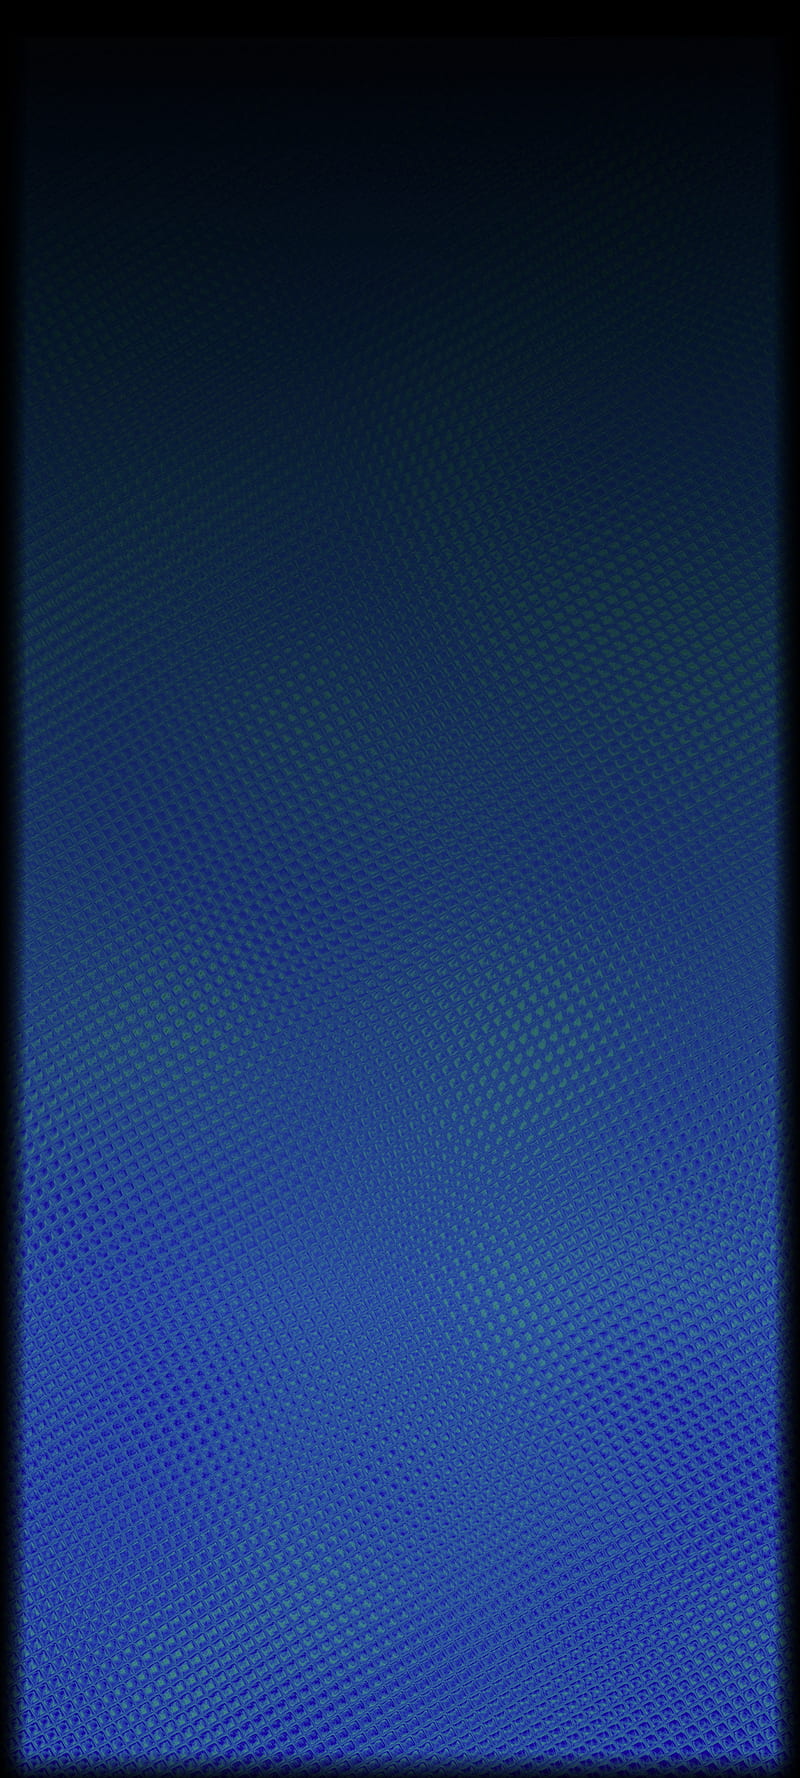 Blue Androis, Fresh, Samsung Galaxy, Artwork, Award Winner, Cool, Vintage, High Definition, Super, Locked Screen, , Special, New S20.Android13, A51, Druffix, Gigaset, Apple iPhone, 2021, iPhoneX, M32, Magma, Modern Style, 5G, Love, contrast, Edge, Nokia, HD phone wallpaper